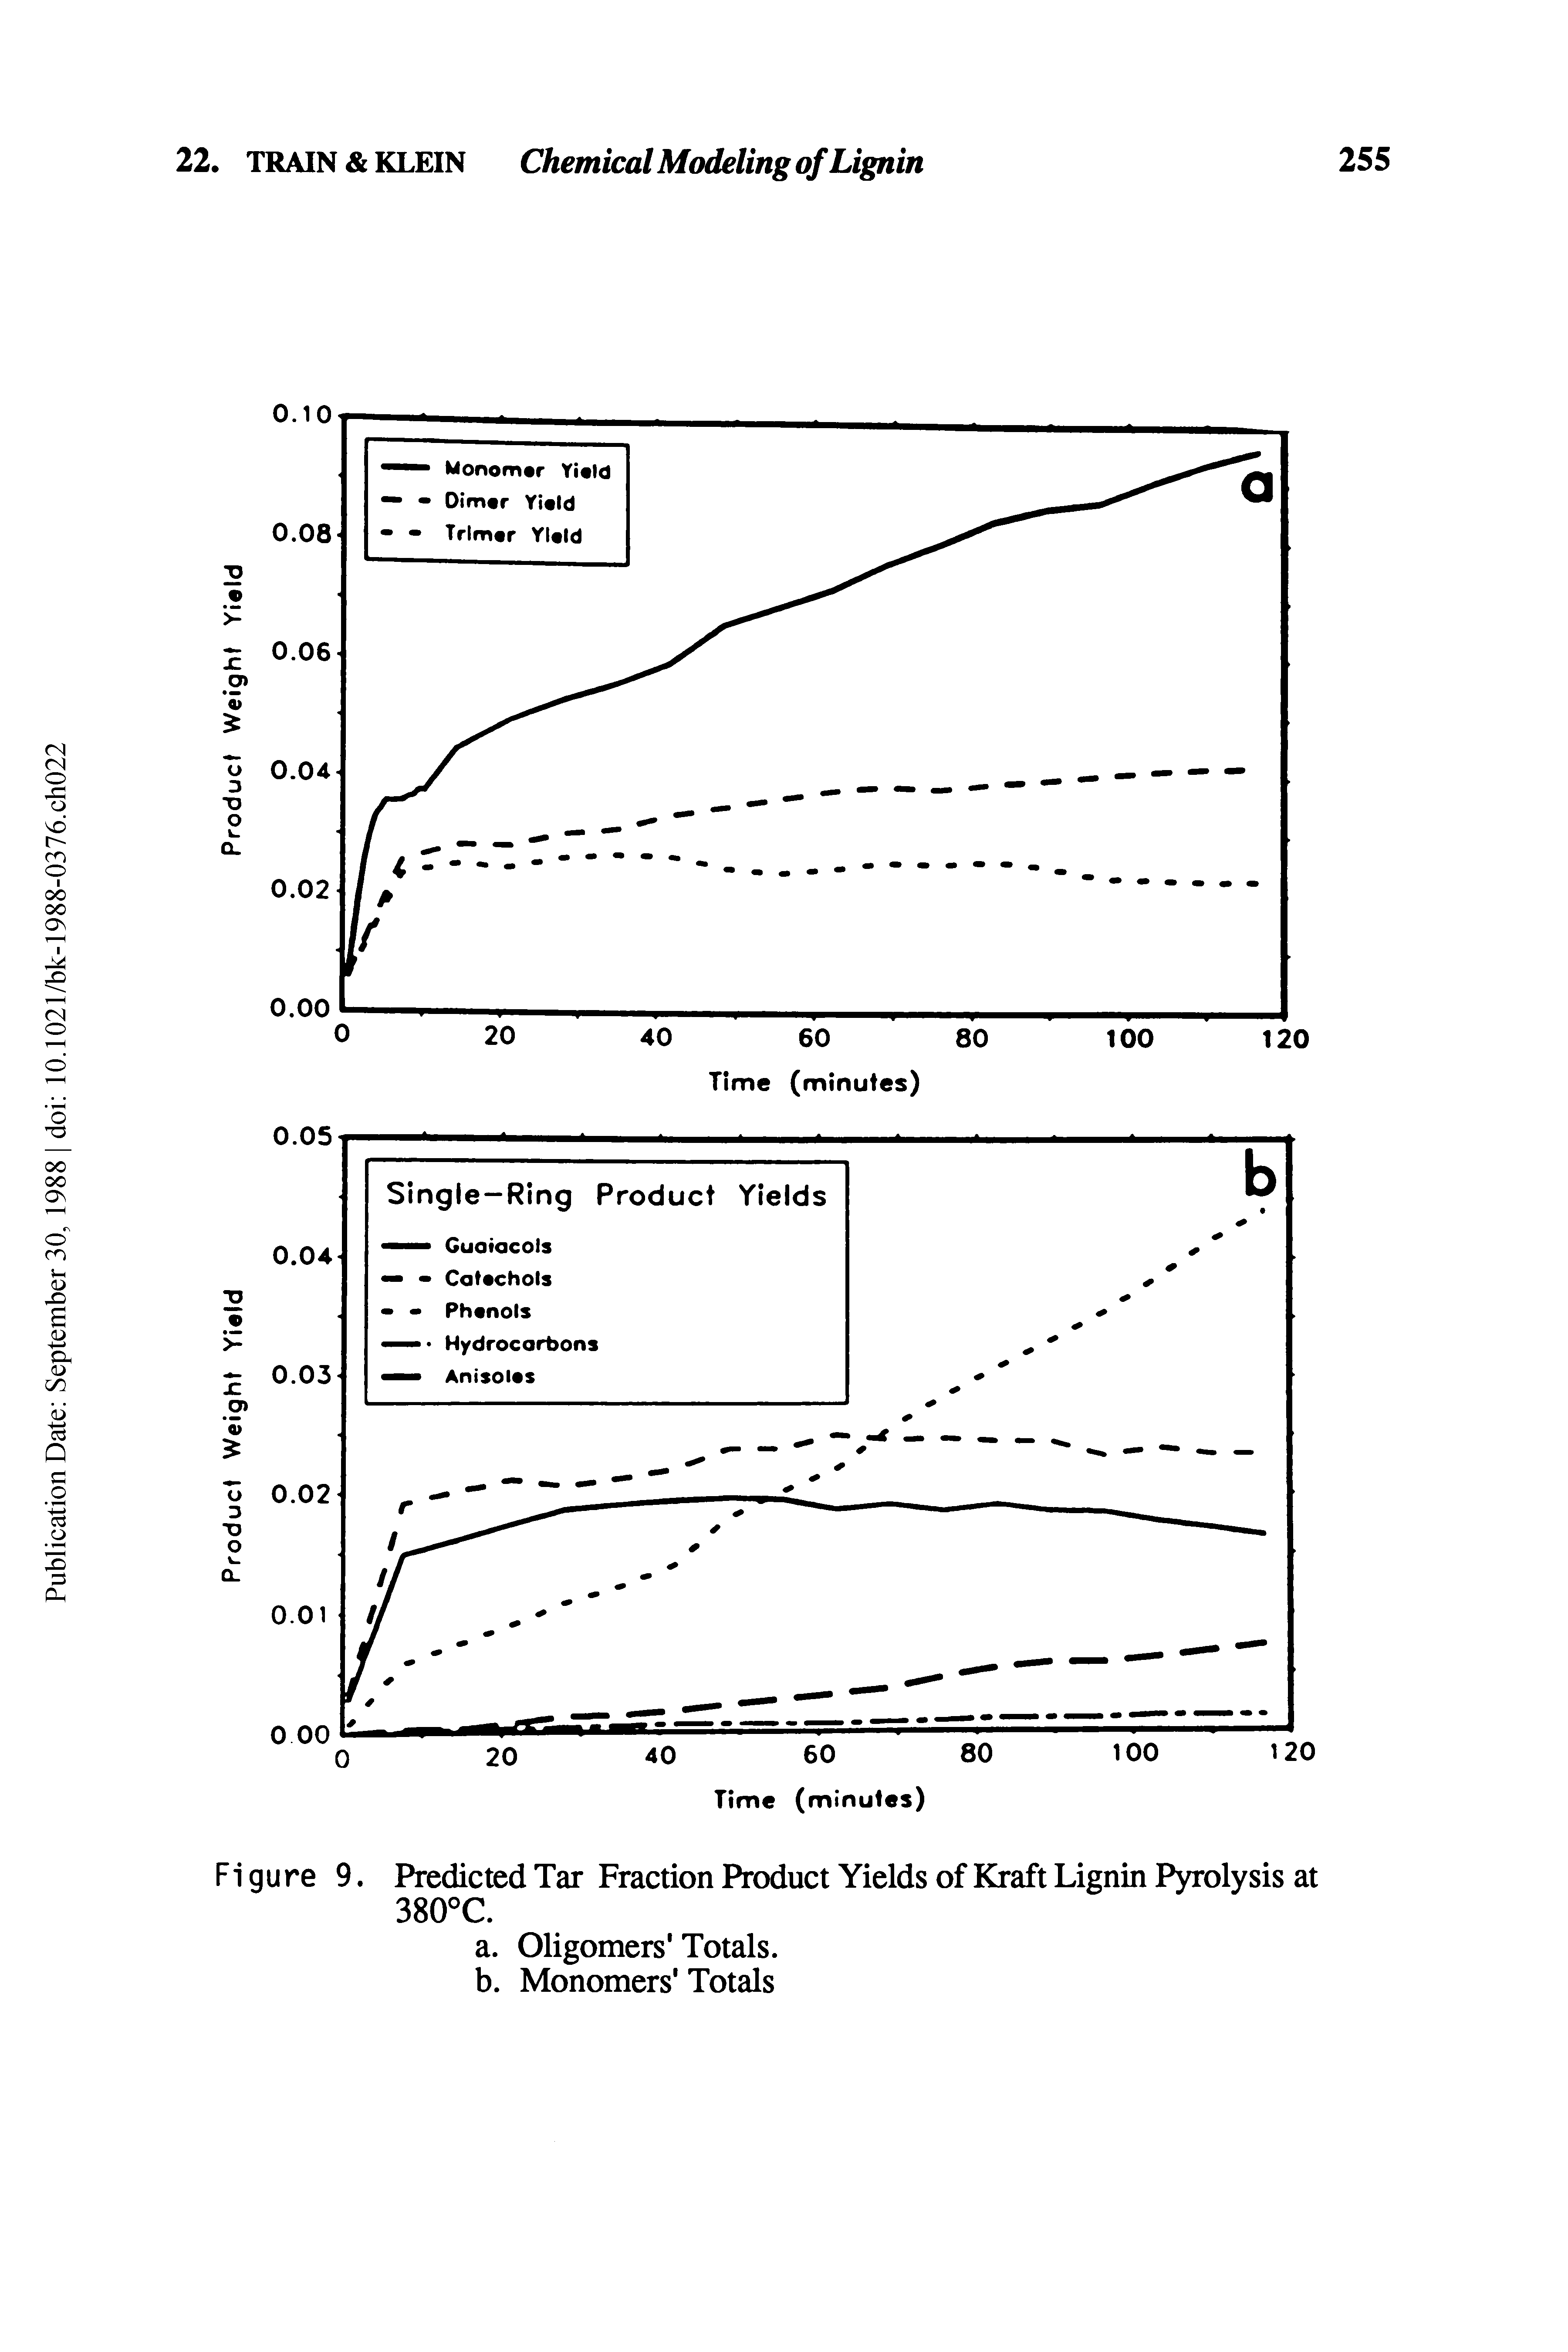 Figure 9. Predicted Tar Fraction Product Yields of Kraft Lignin Pyrolysis at 380°C.